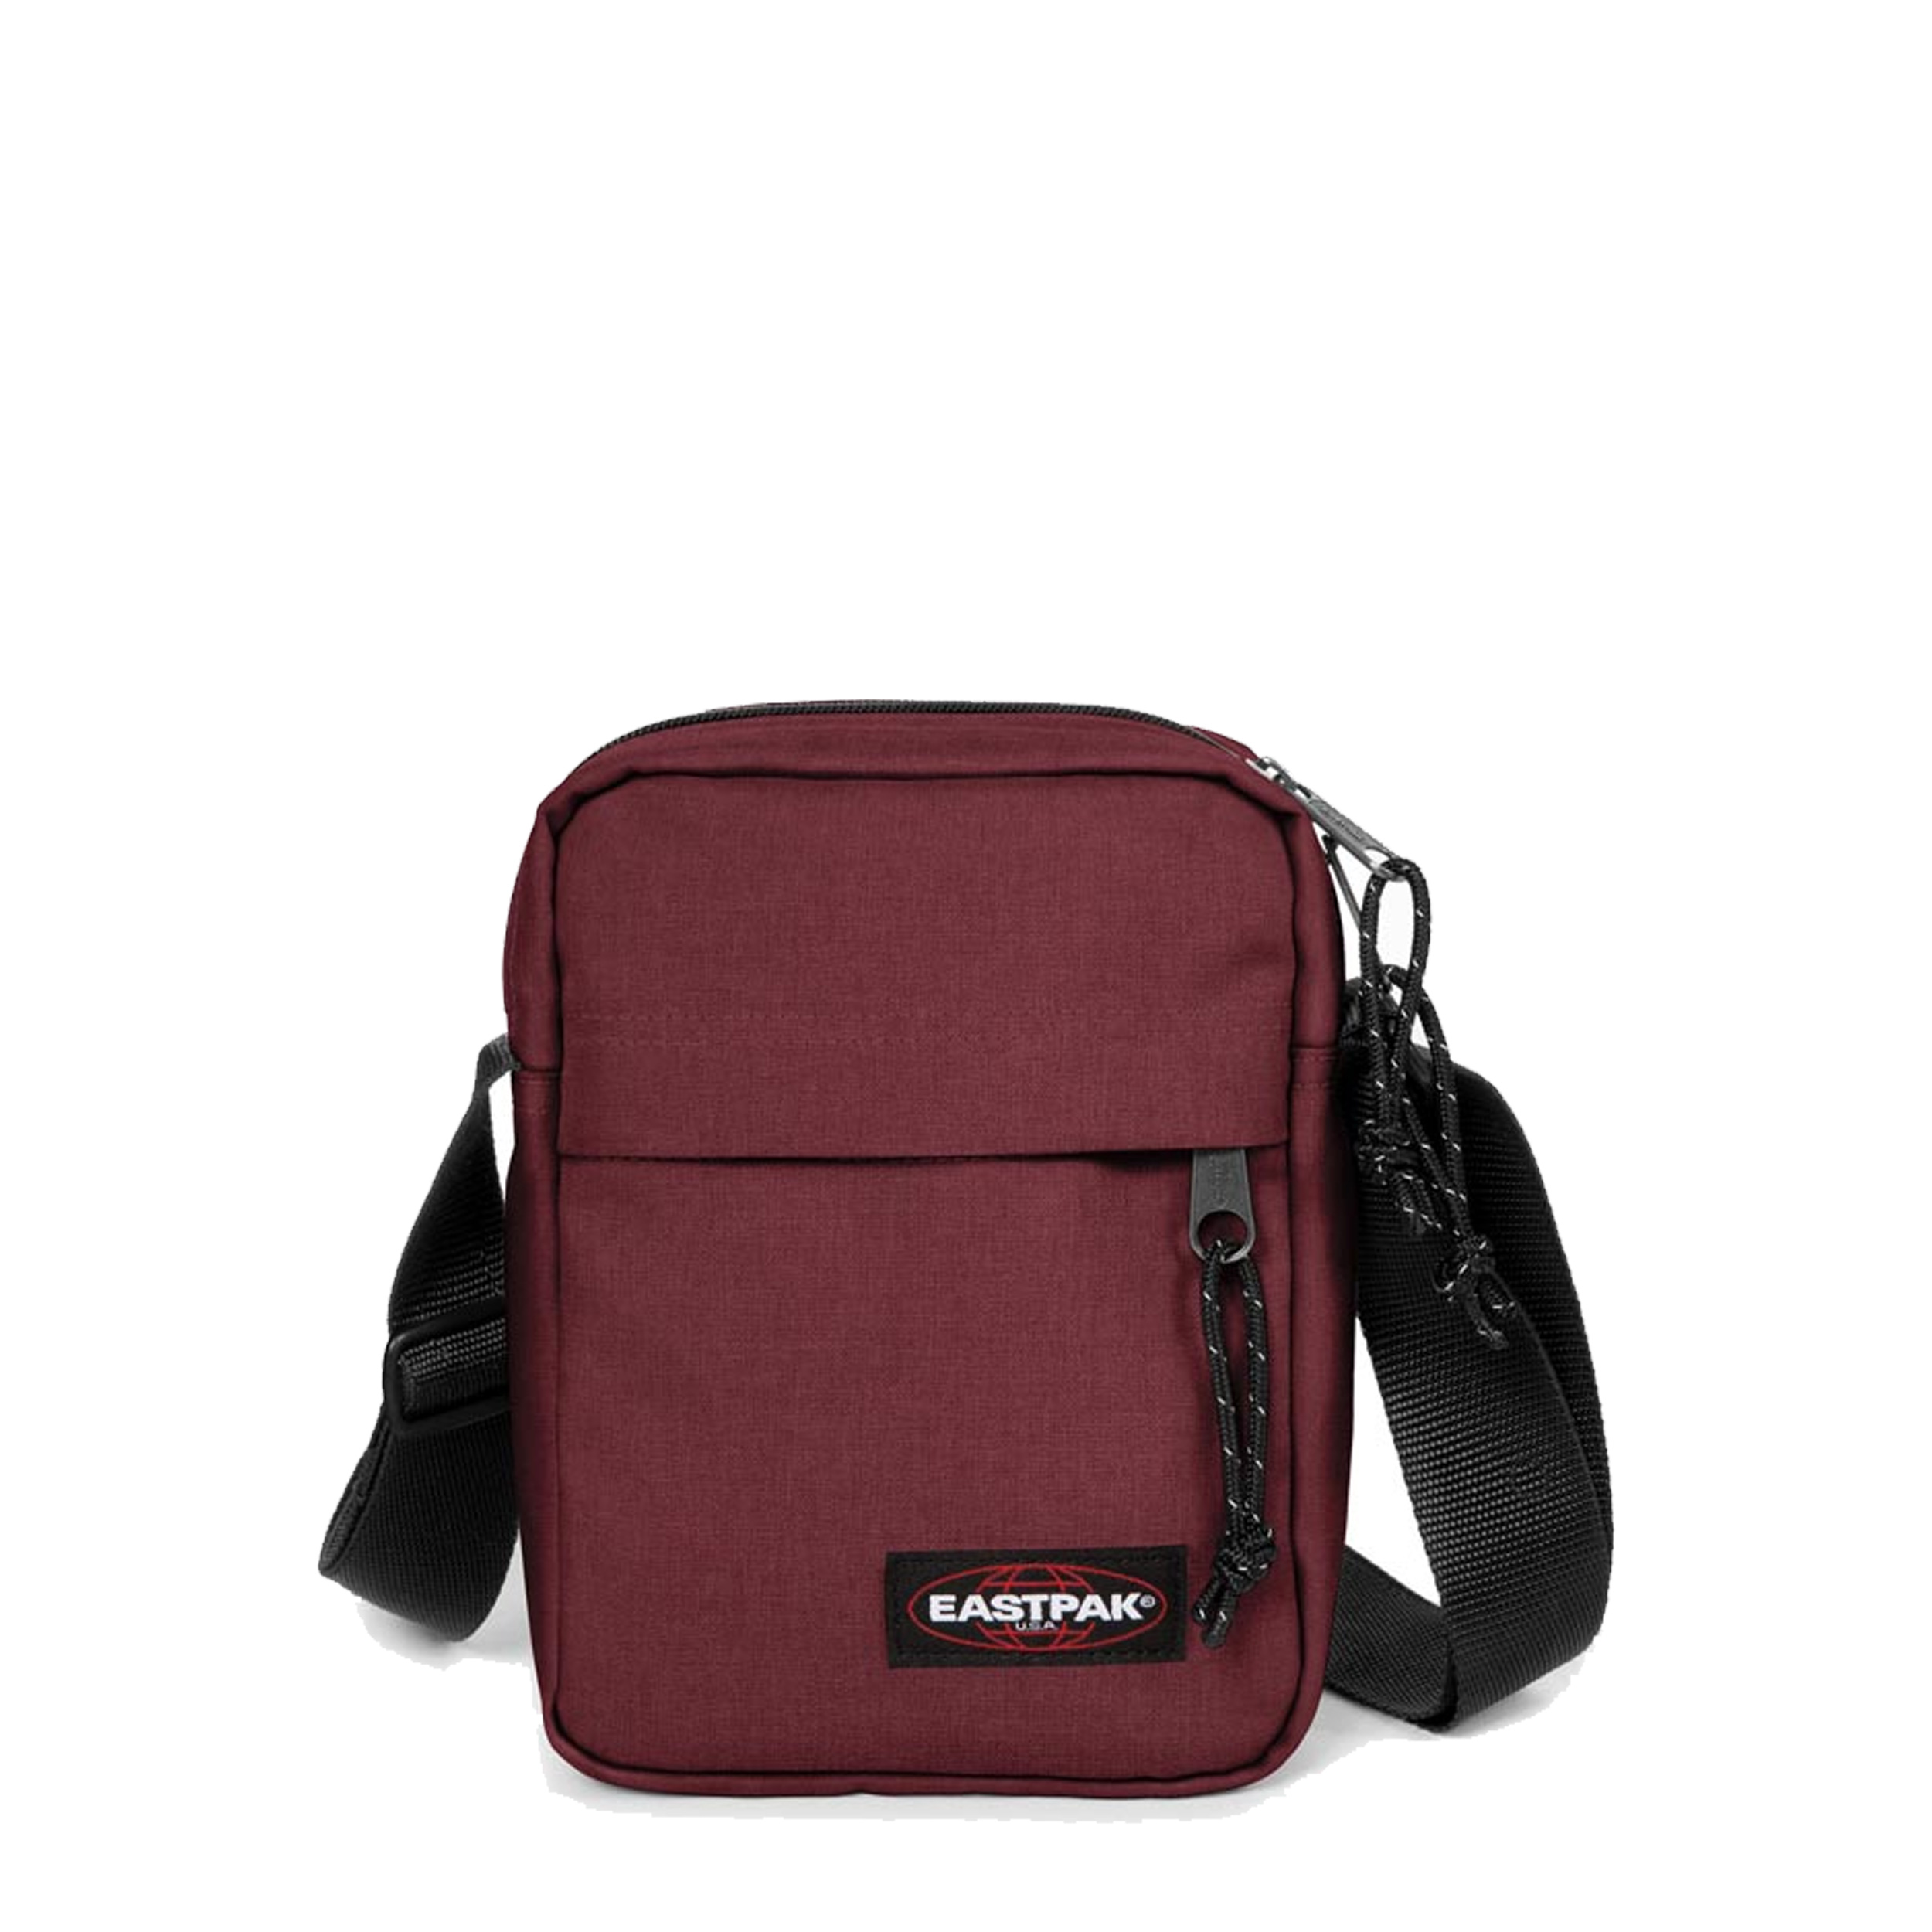 Sacoche The One Authentic Eastpak crafty wine avant